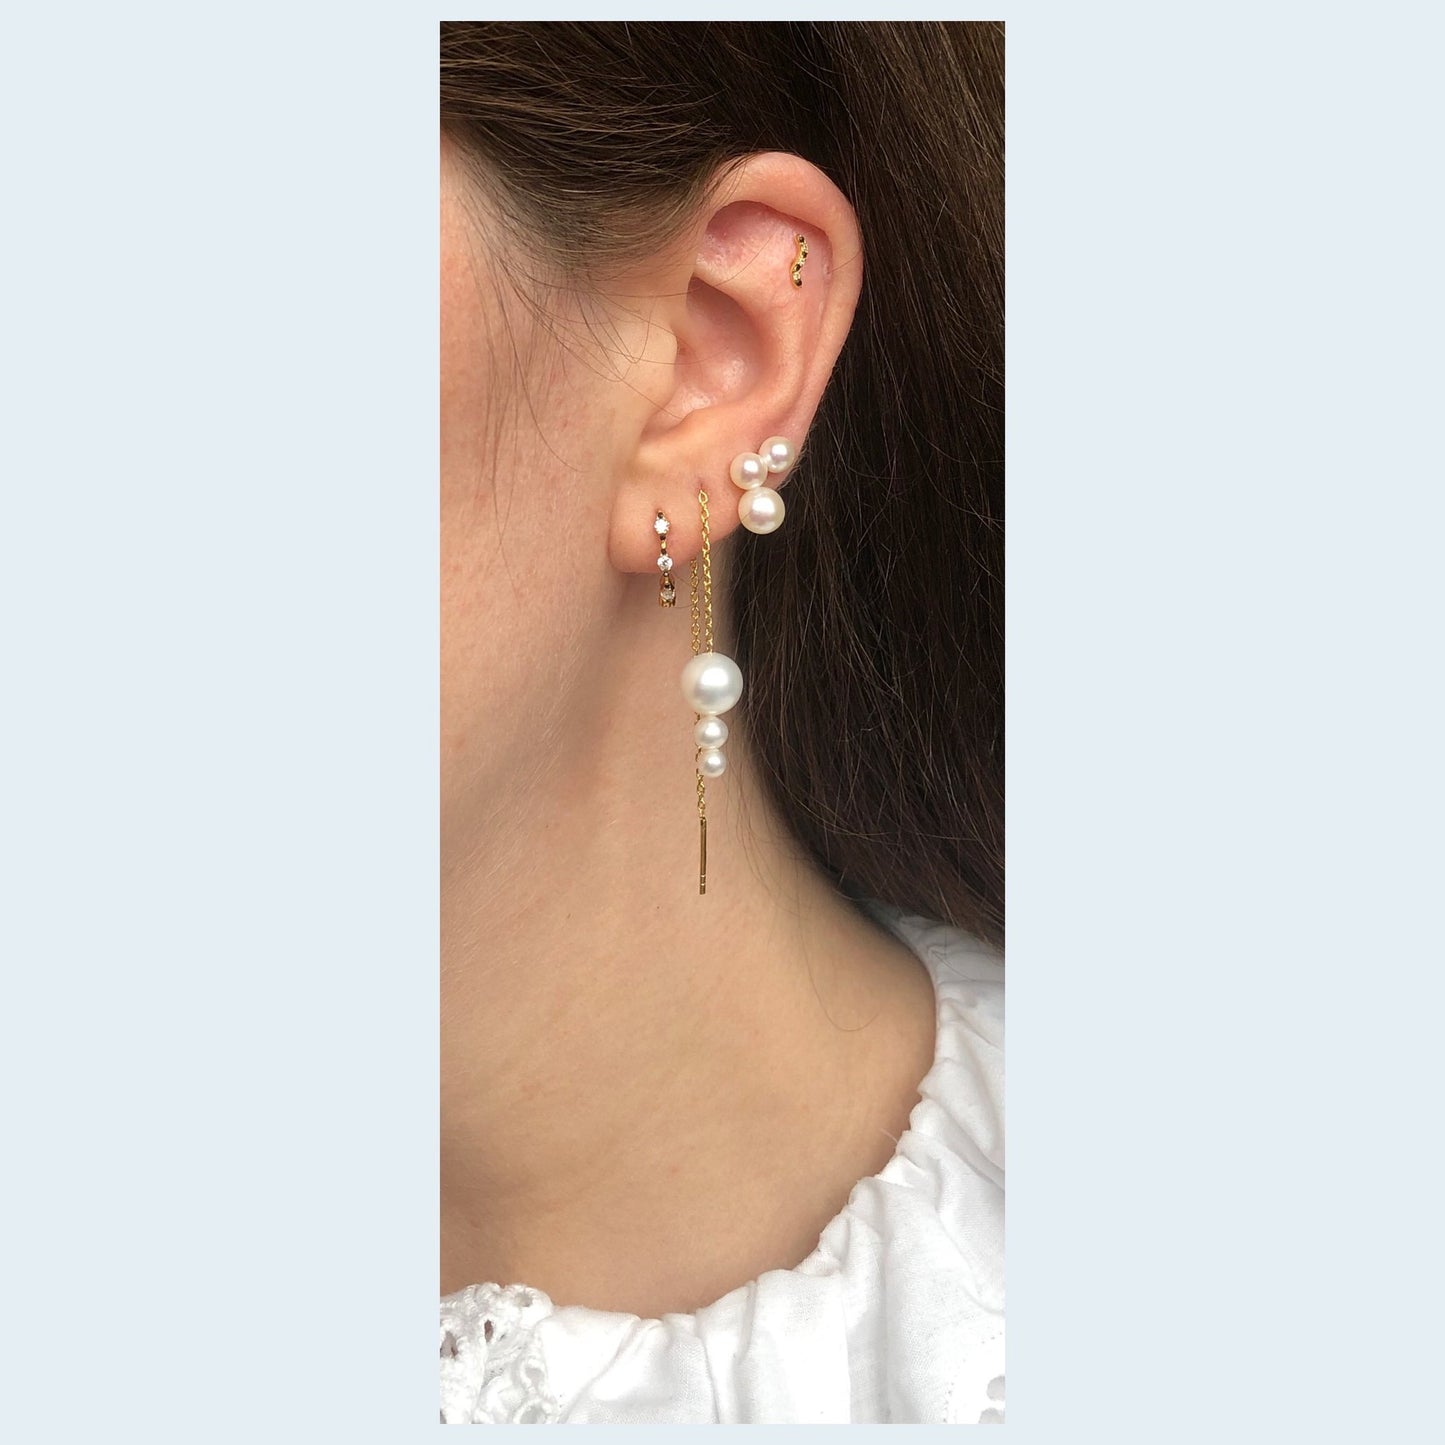 Sunny Threader Earring -  Gold Plated Silver White Freshwater Pearls, Cubic zirconias